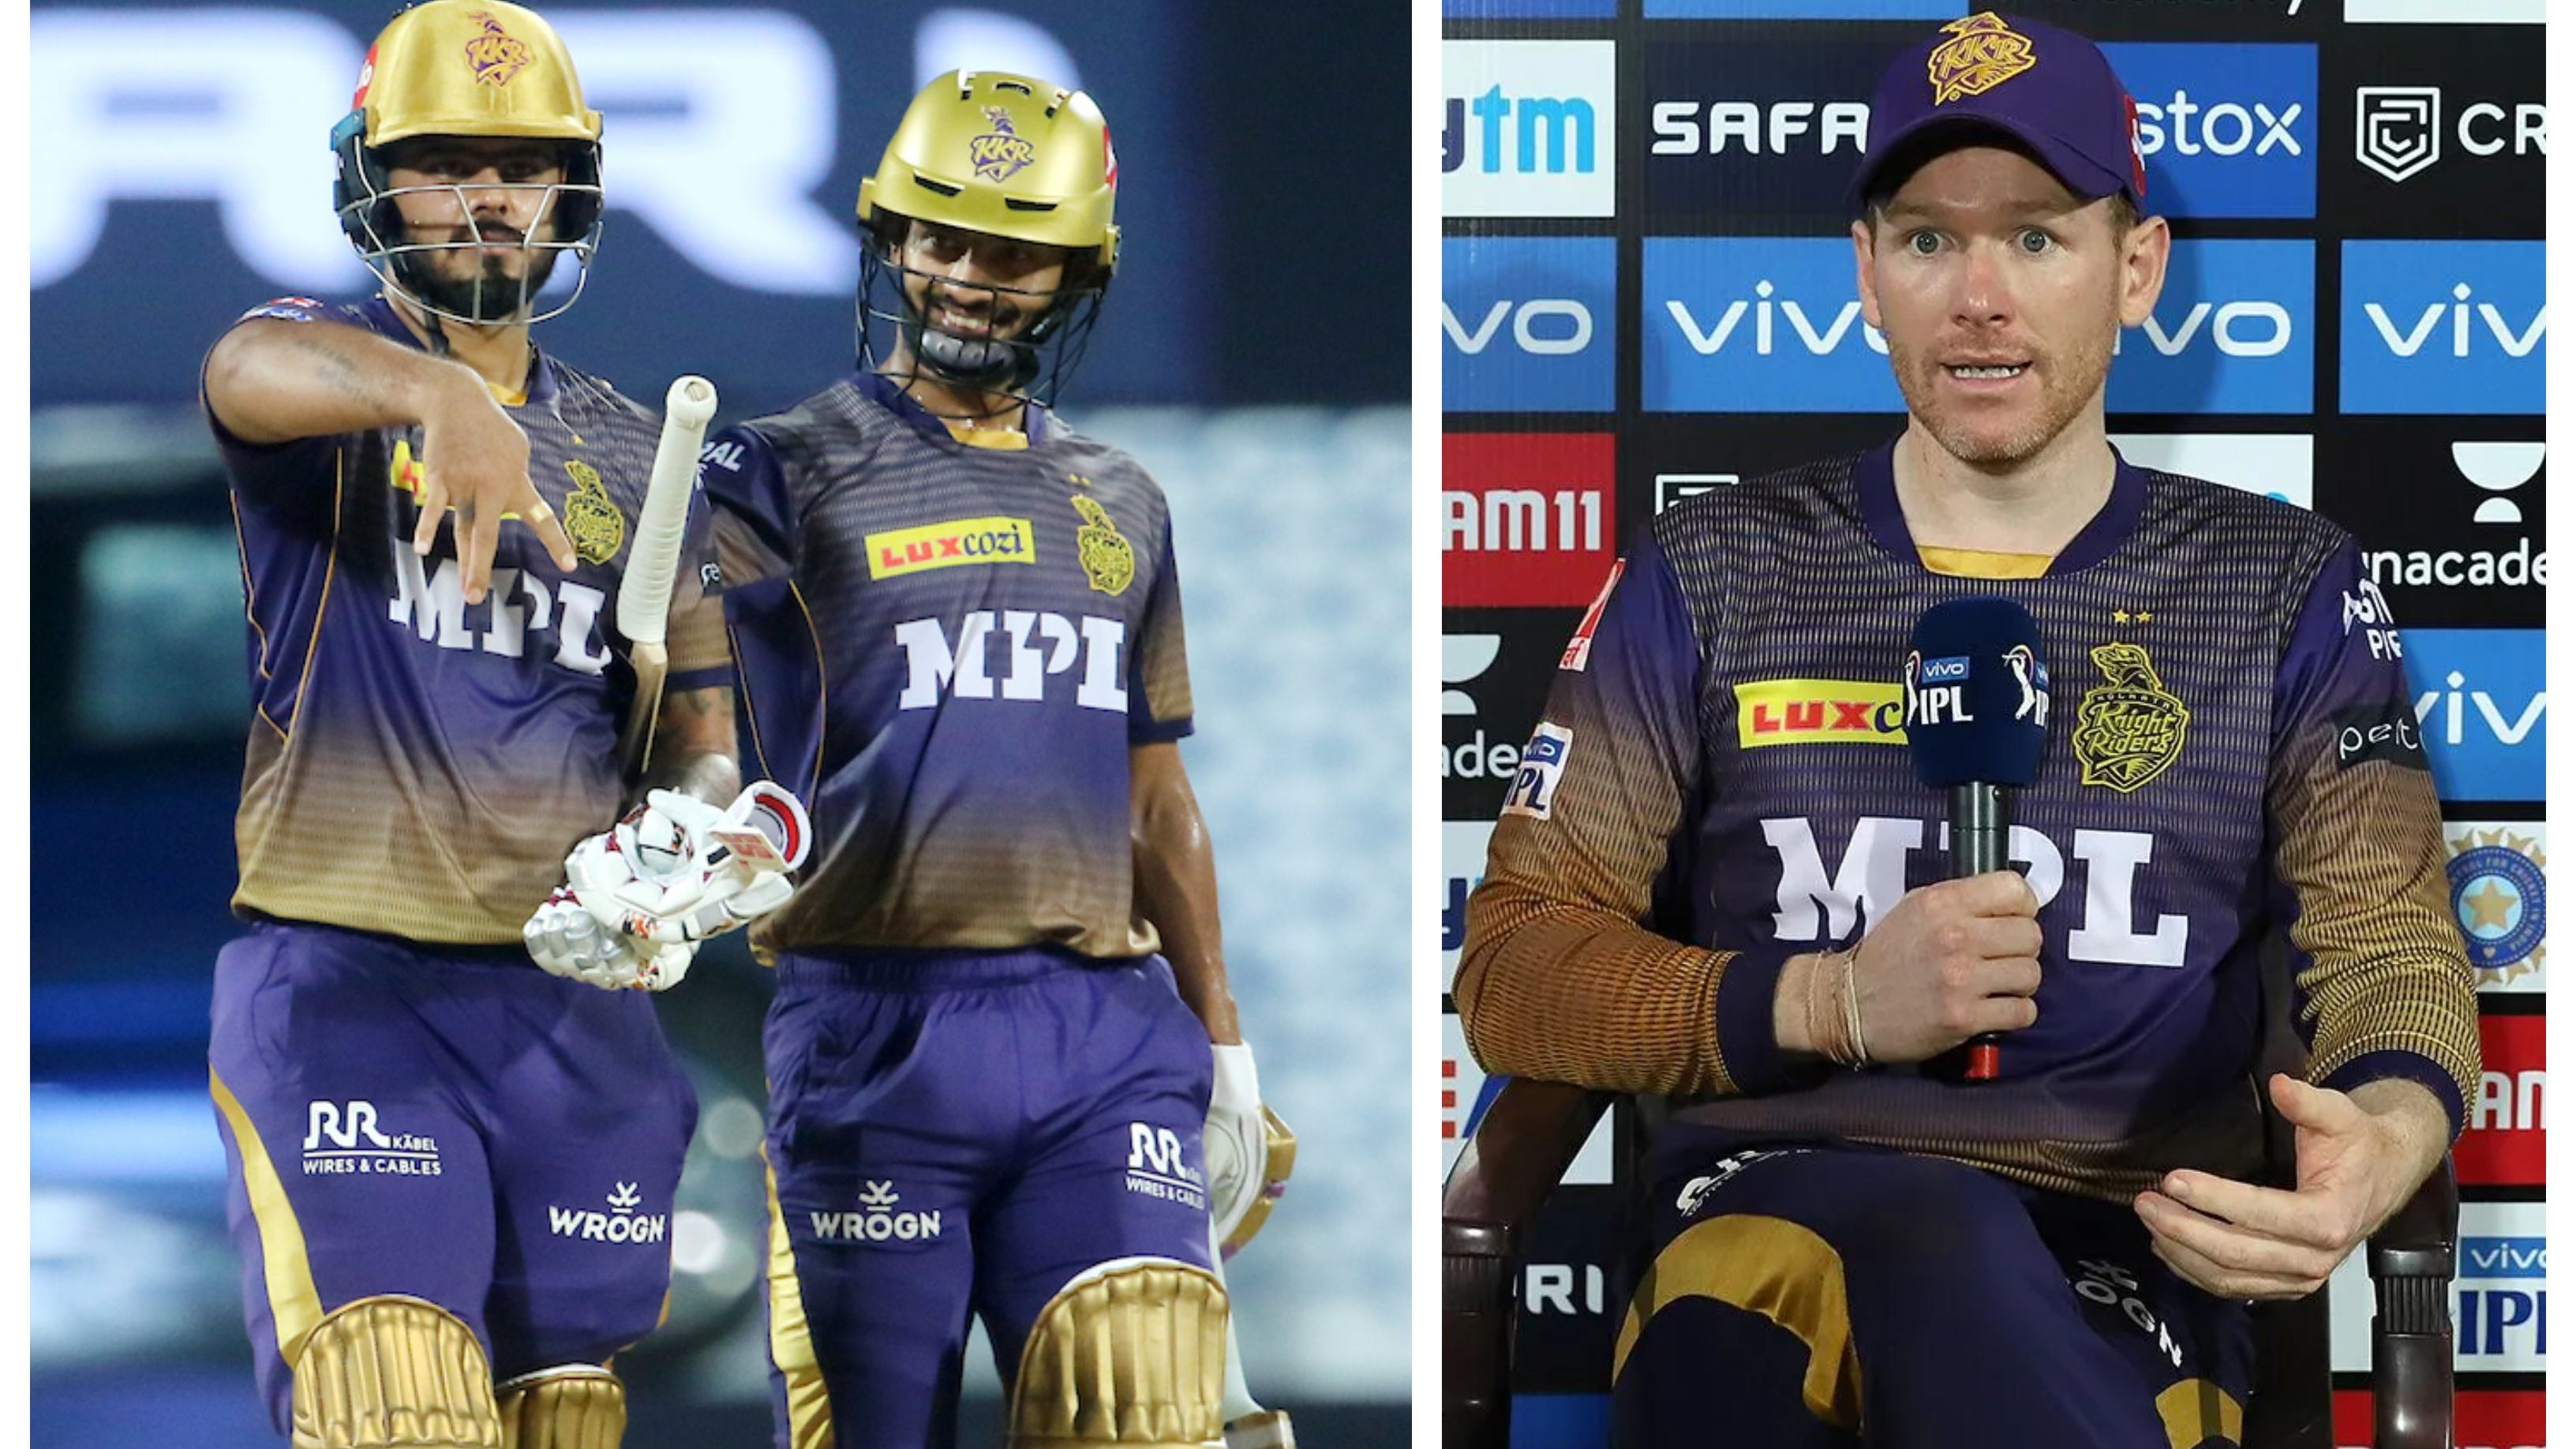 IPL 2021: “Nitish and Tripathi were absolutely outstanding”, says Eoin Morgan after KKR’s win over SRH